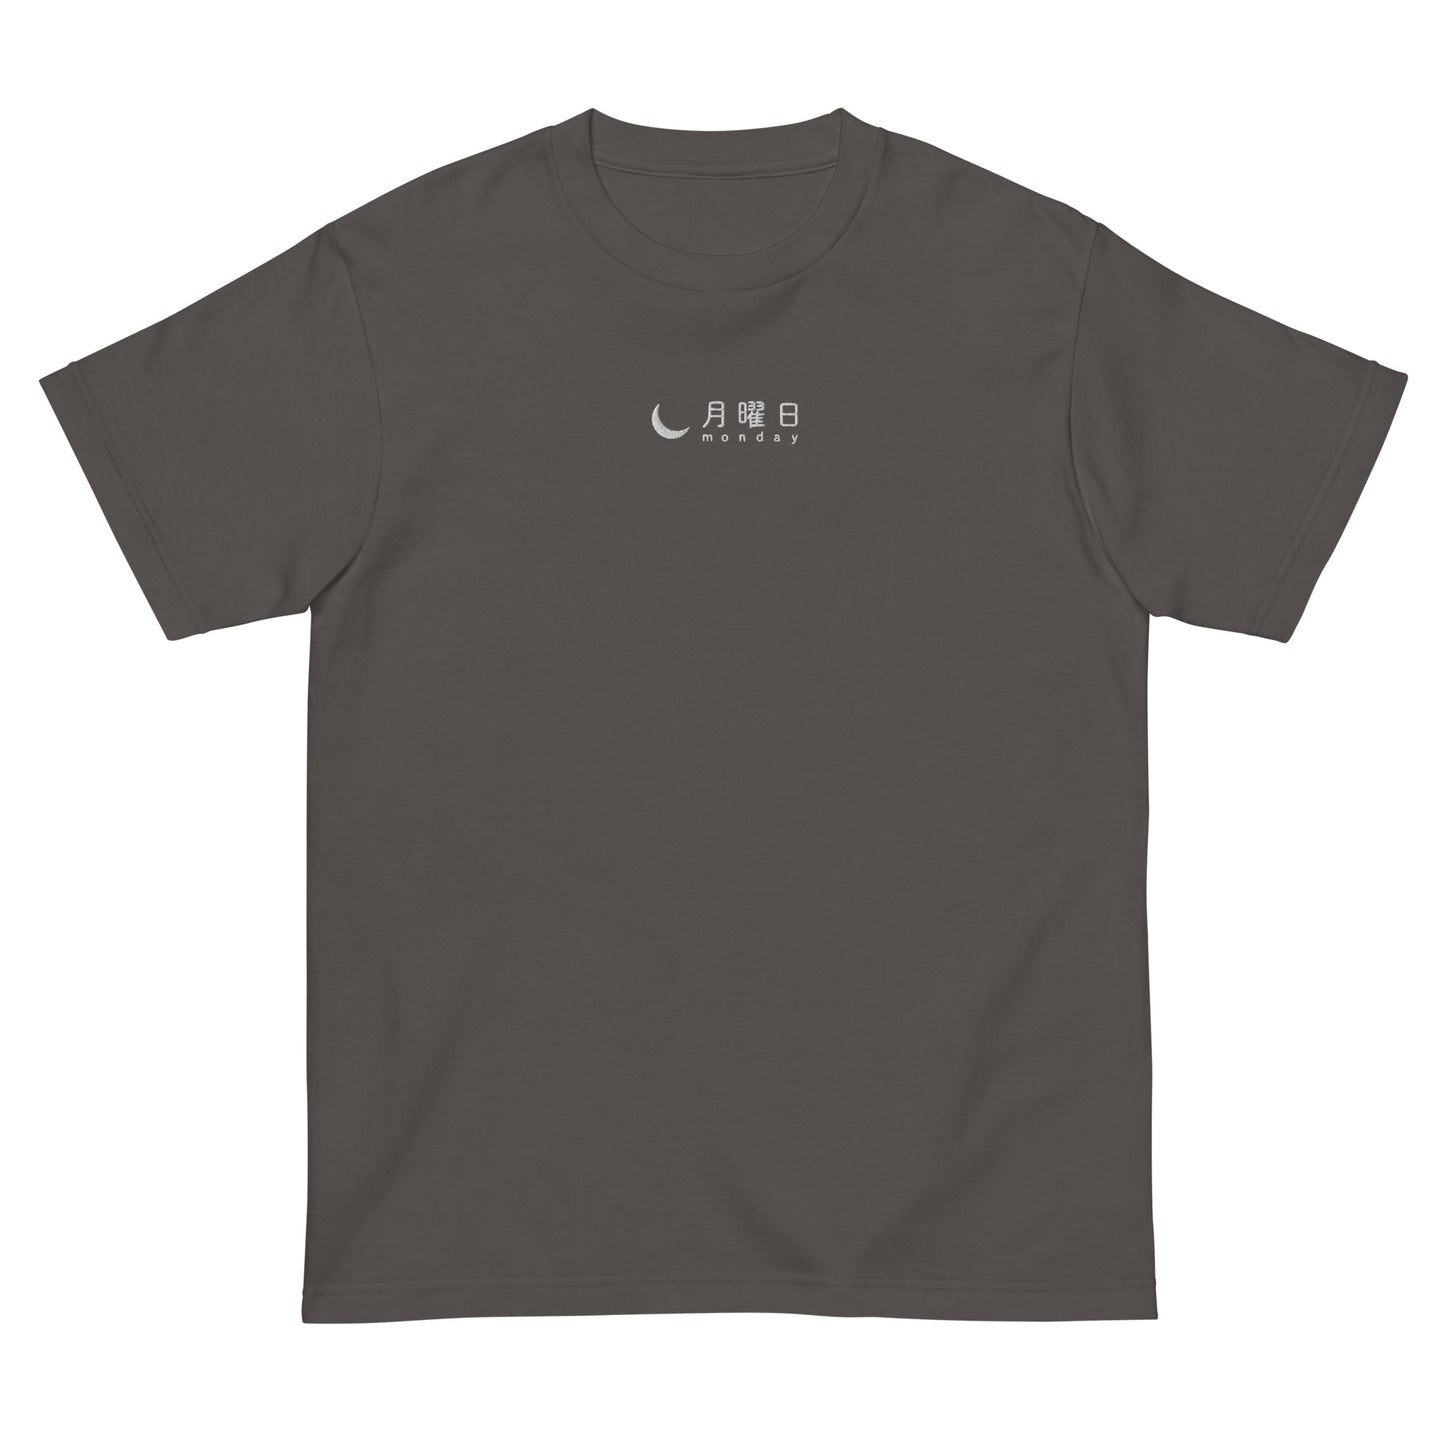 Dark Gray High Quality Tee - Front Design with an Black "Monday" in Japanese and English